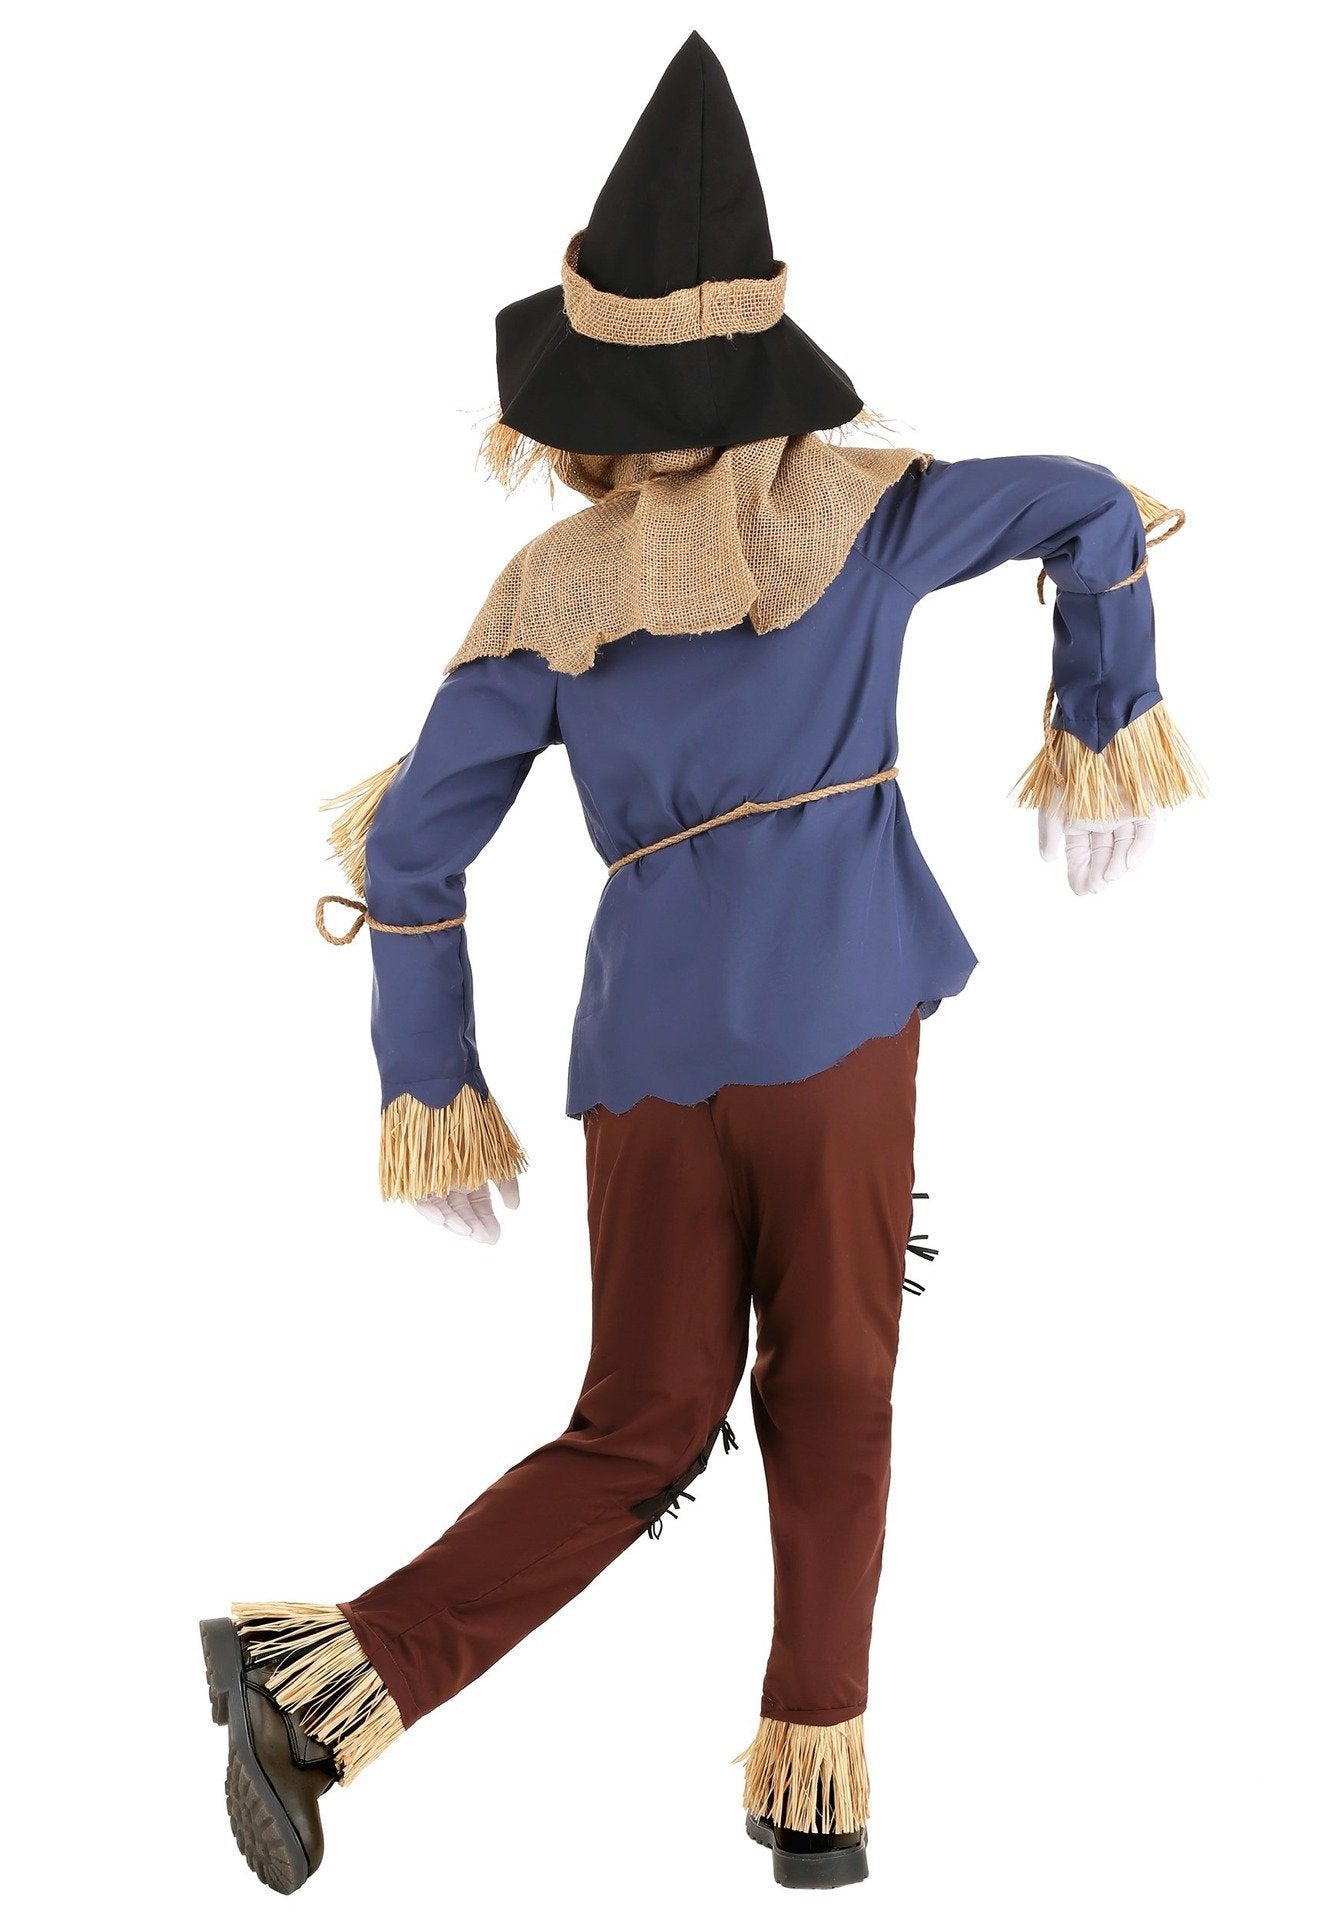 Family Matching Scarecrow Costume Female Male Boys Girls Strawman Halloween Party Dress Up Outfit